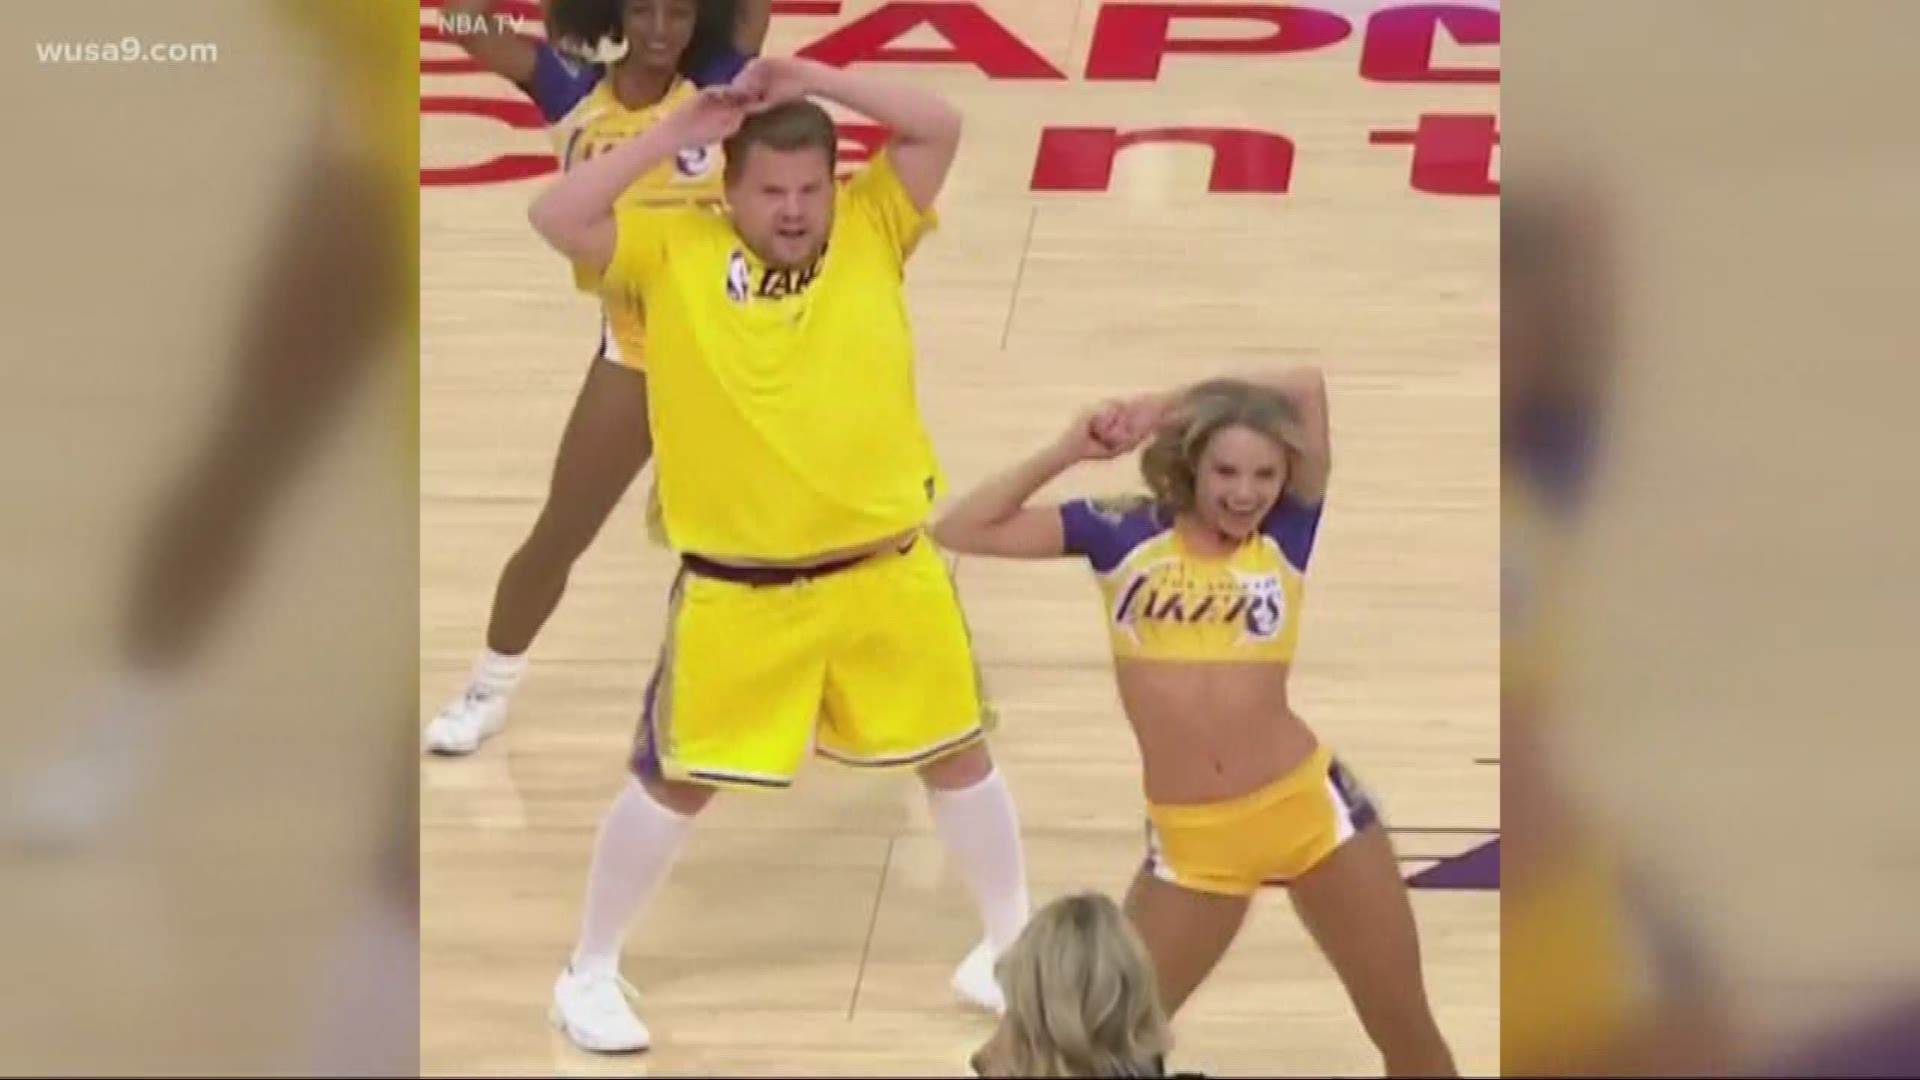 These aren't your usual Laker Girls. Tennis star Venus Williams, Former N-F-L star Rob Gronkowski and The Late Late Show's James Corden all joined the dancers.